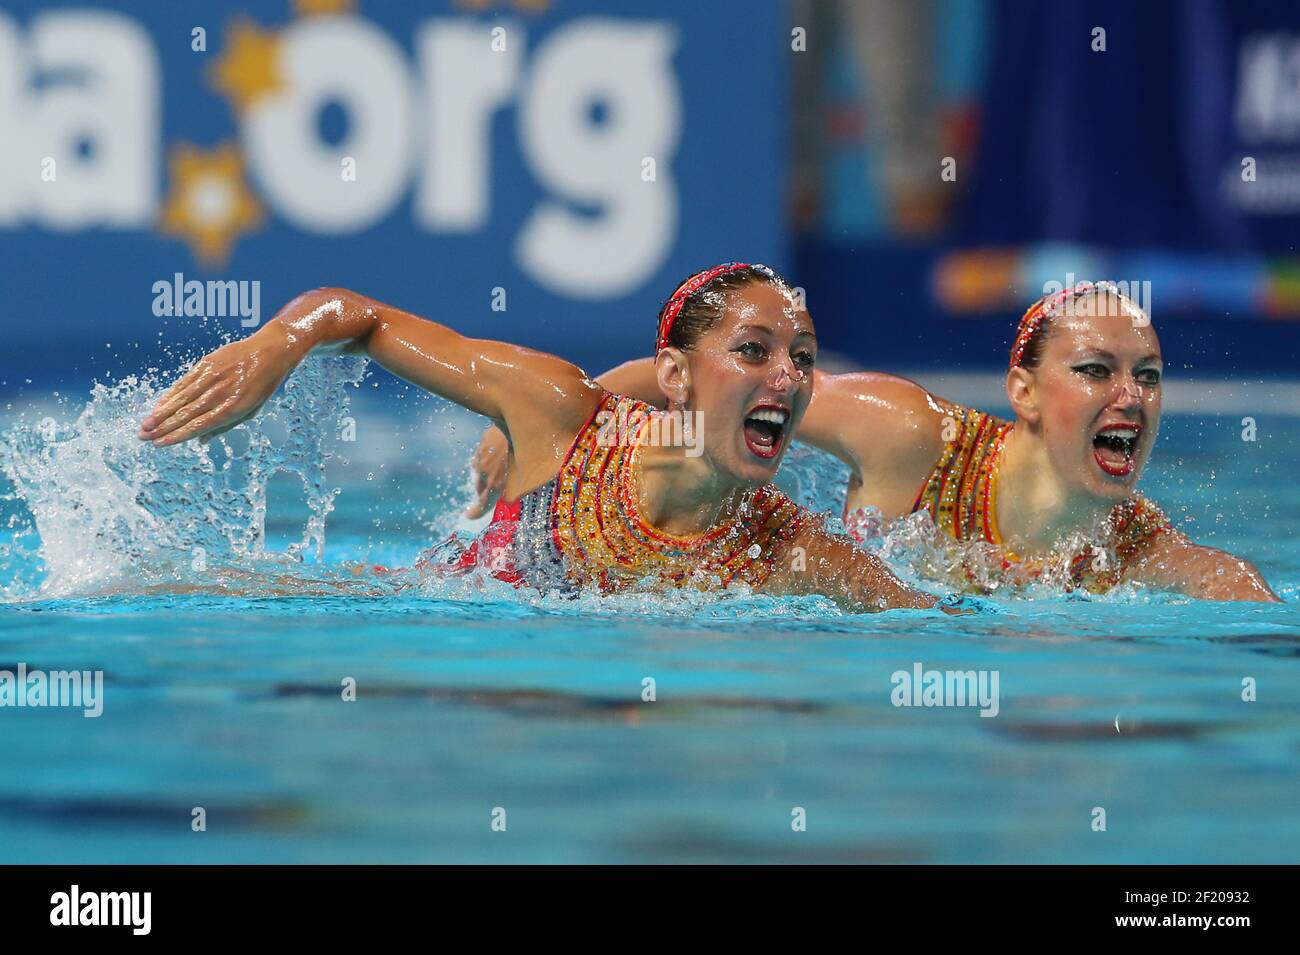 Margaux Chretien and Laura Auge for France compete on Duet Free Final in Synchronised Swimming during the 16th Fina World Championships 2015, in Kazan, Russia, Day 7, on July 30, 2015 - Photo Stephane Kempinaire / KMSP / DPPI Stock Photo